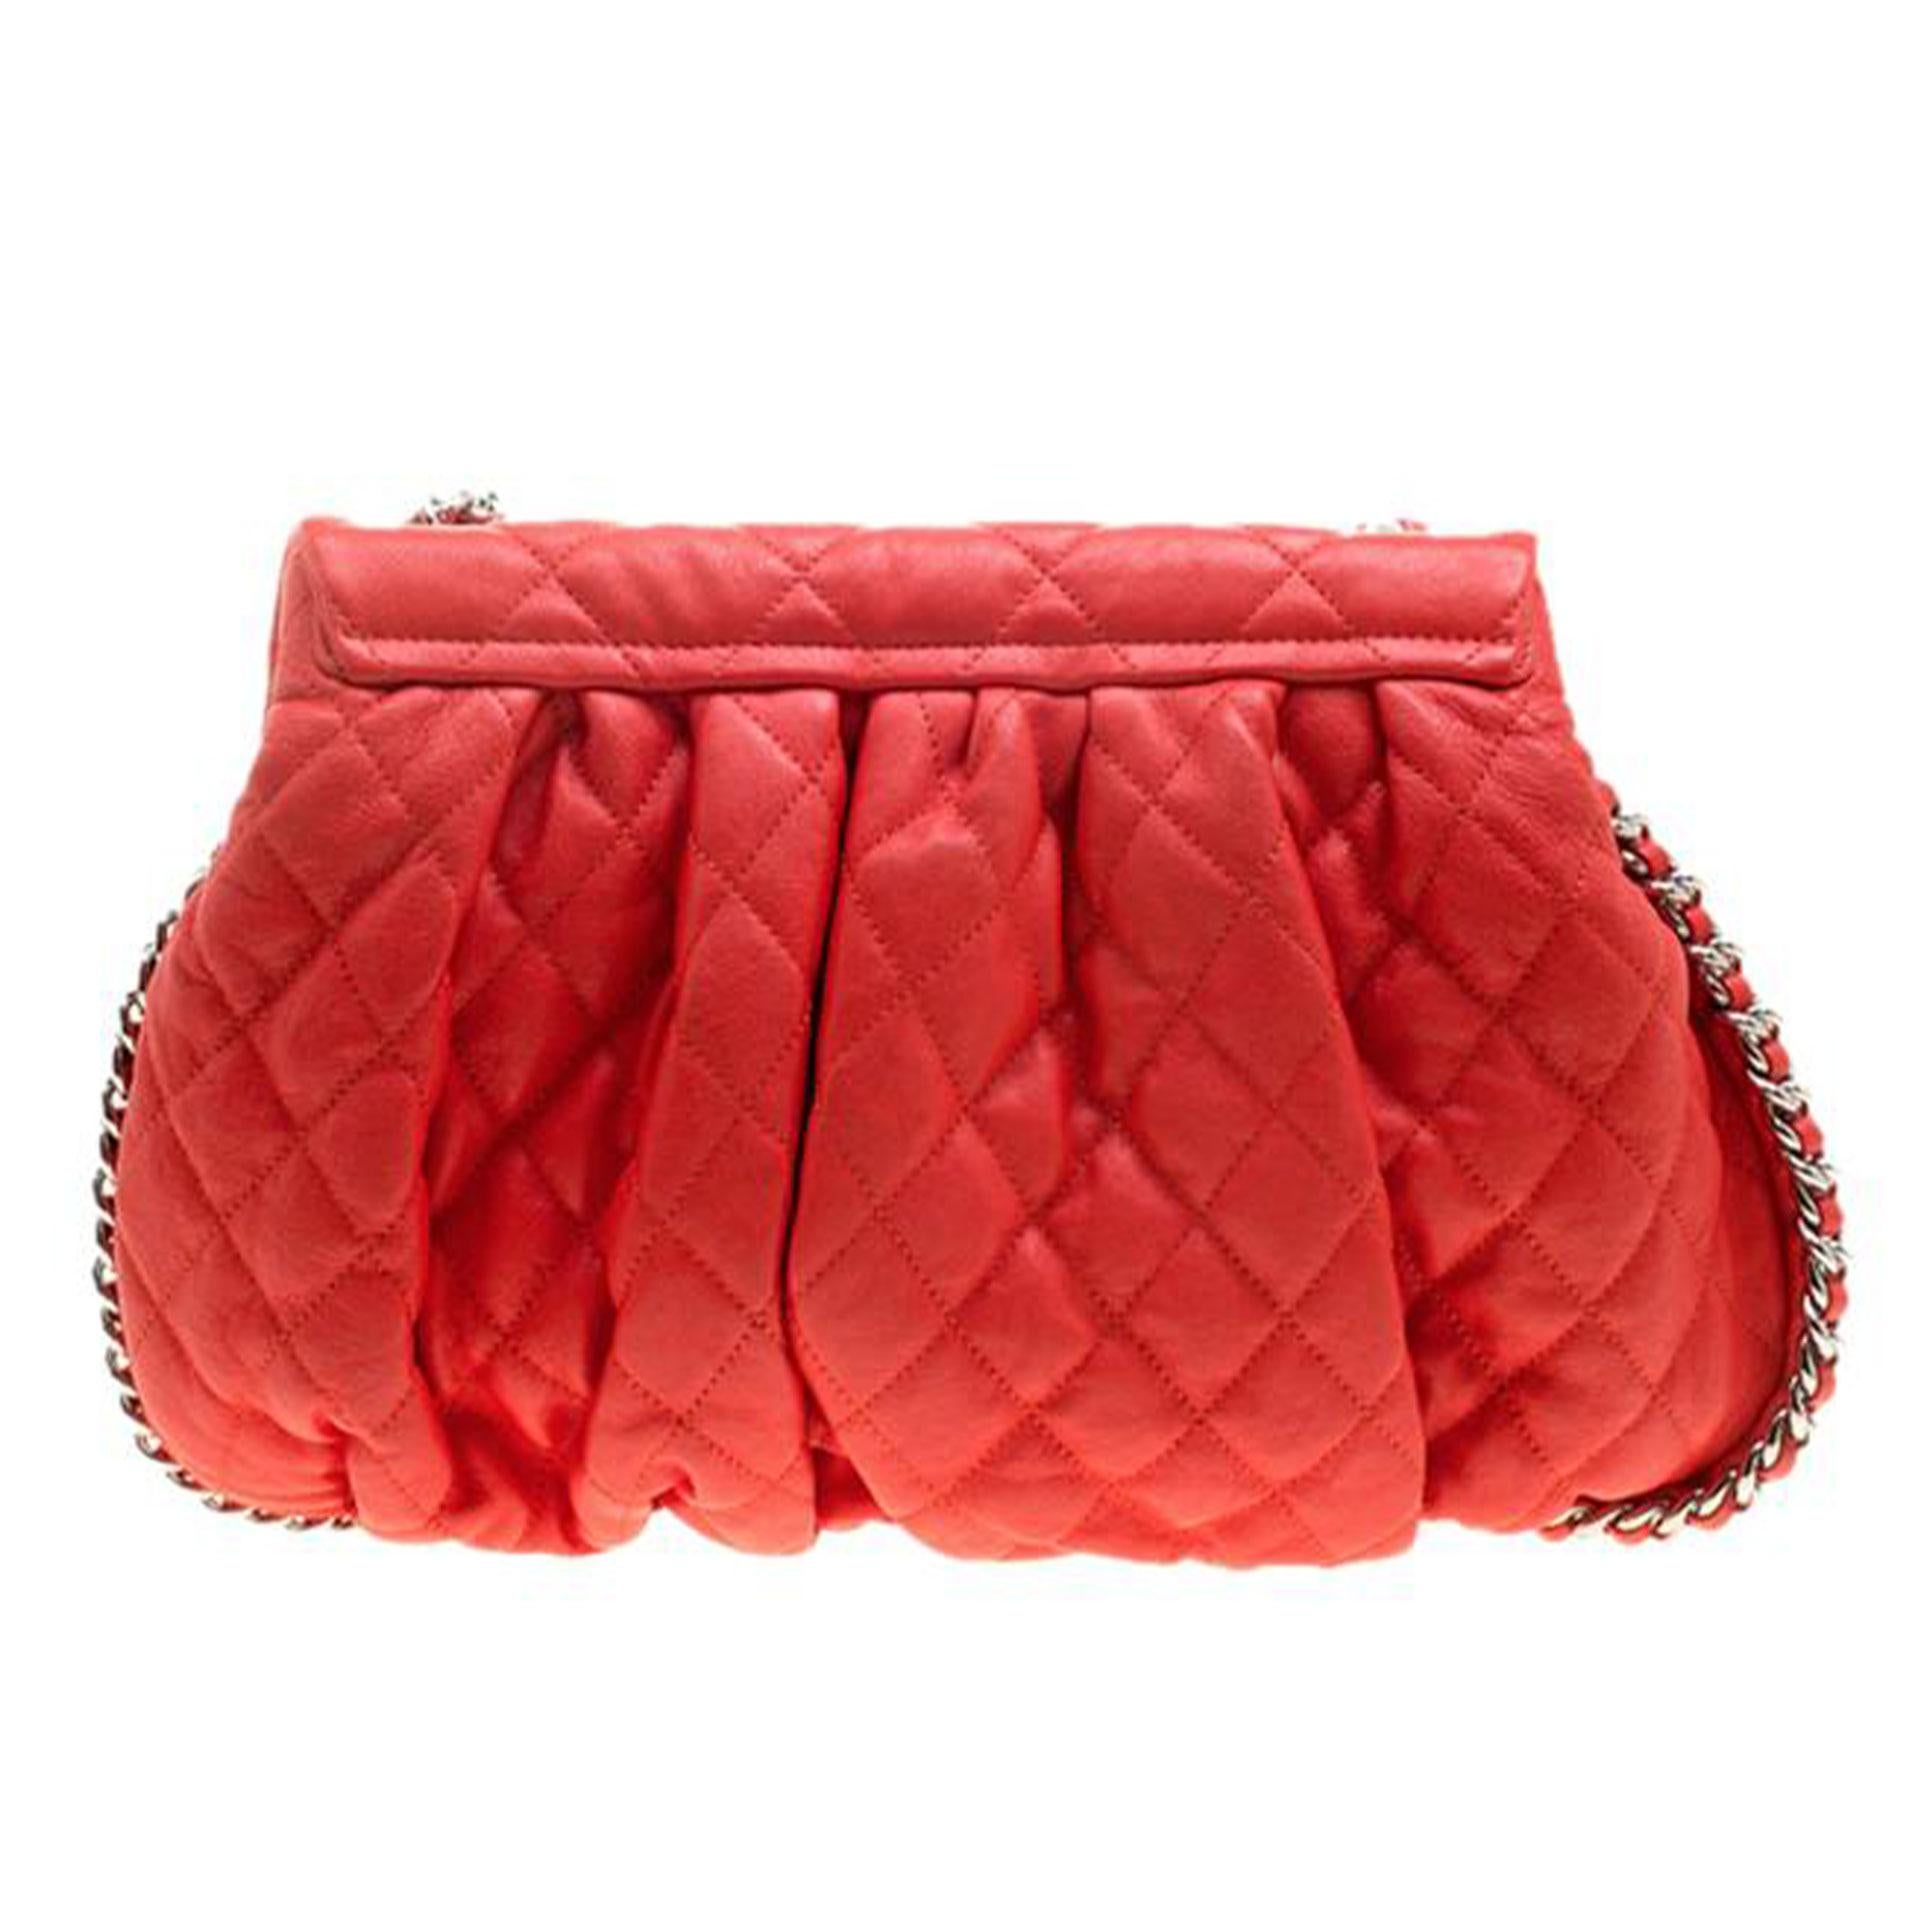 Chanel Large Chain Around Limited Edition Pristine Red Calfskin Leather Flap Bag For Sale 7